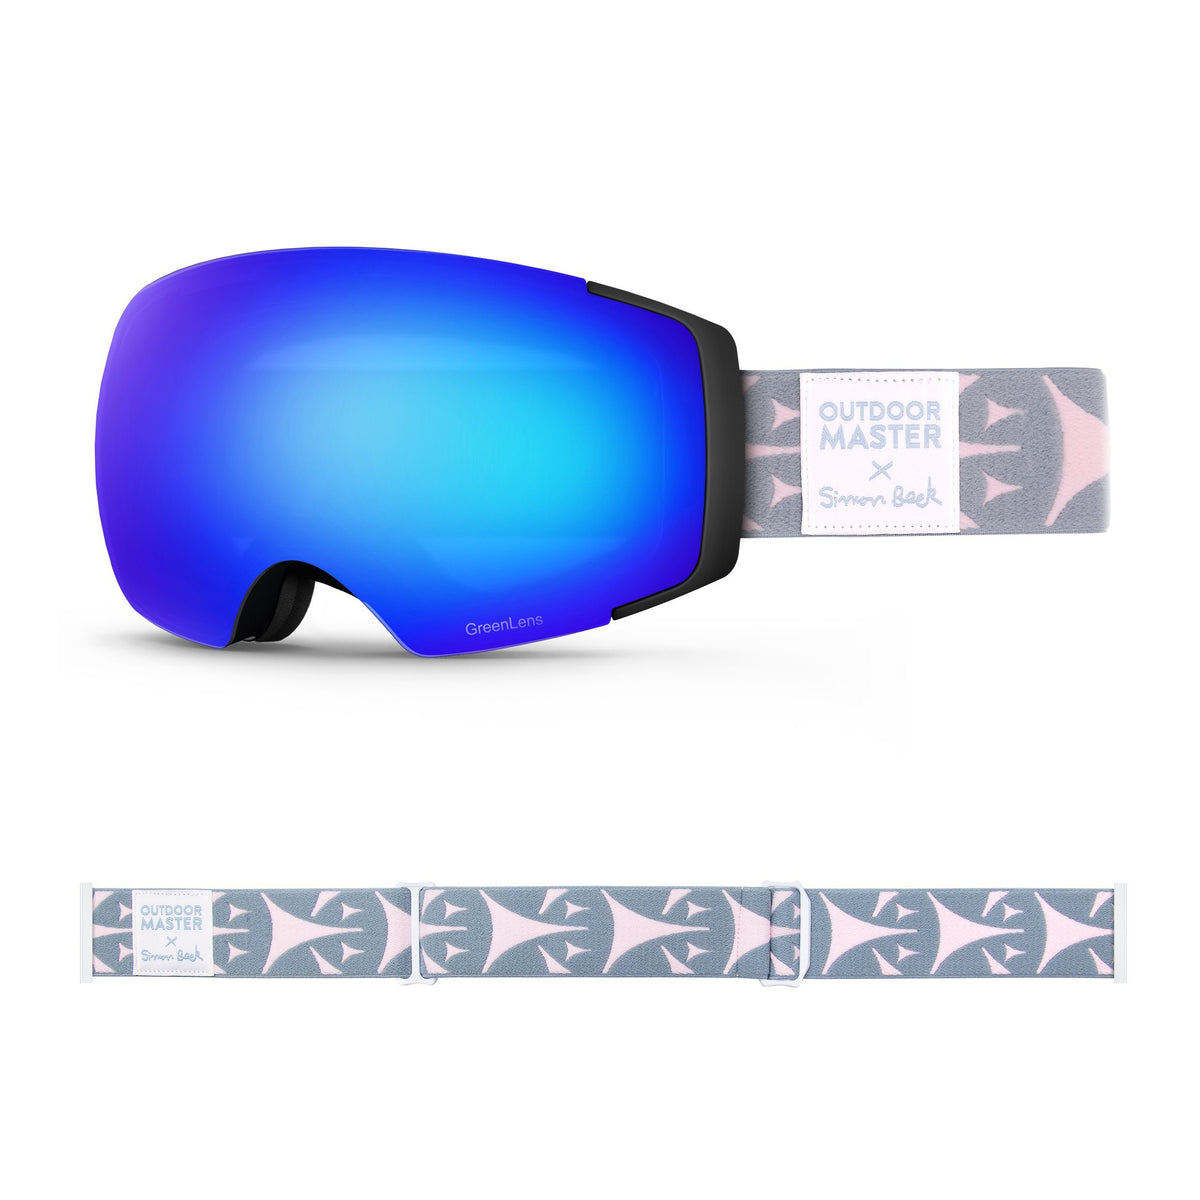 OutdoorMaster x Simon Beck Ski Goggles Pro Series - Snowshoeing Art Limited Edition OutdoorMaster GreenLens VLT 15% TAC Grey with REVO Blue Polarized Bouncy Triangles